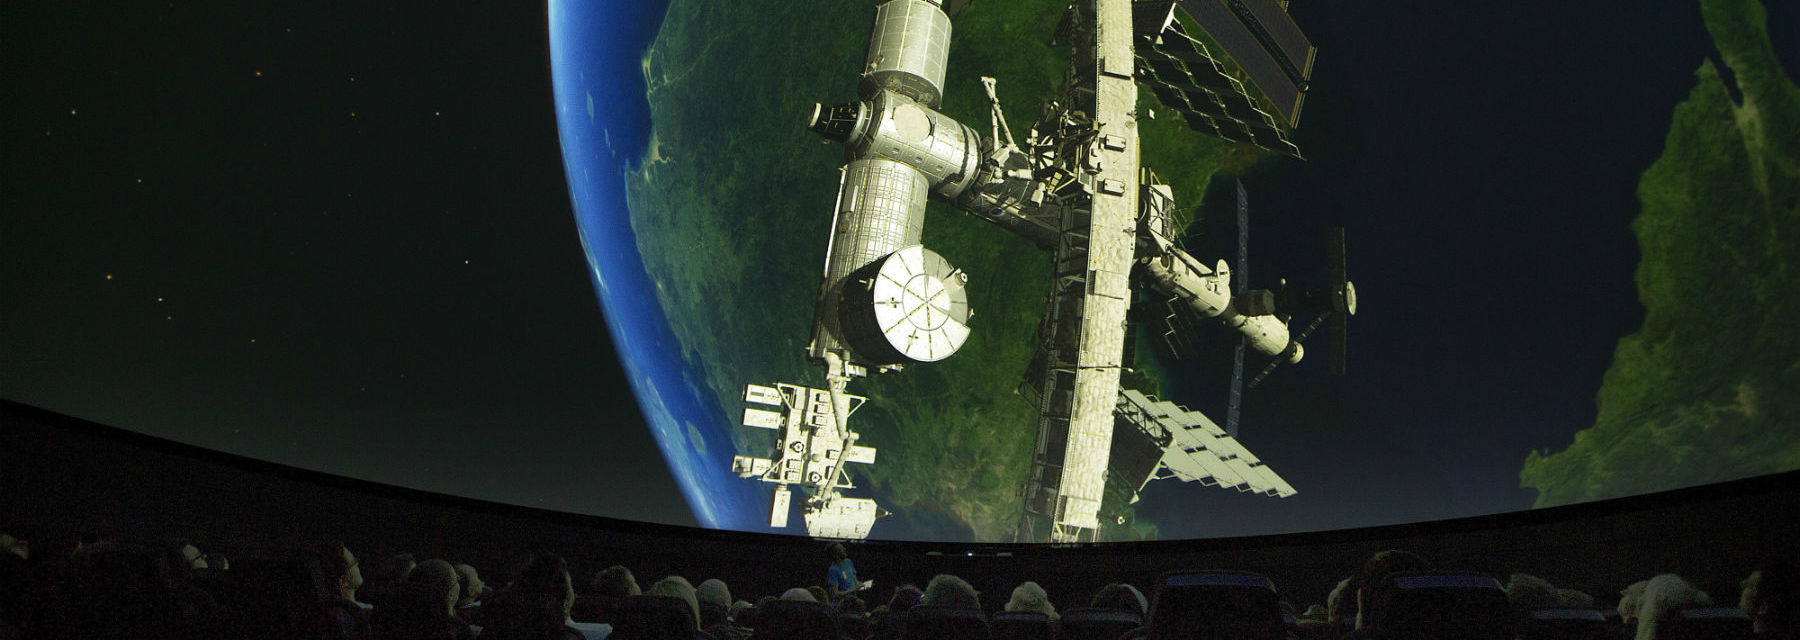 The International Space Station above the Earth as viewed from within the Planetarium at GSC